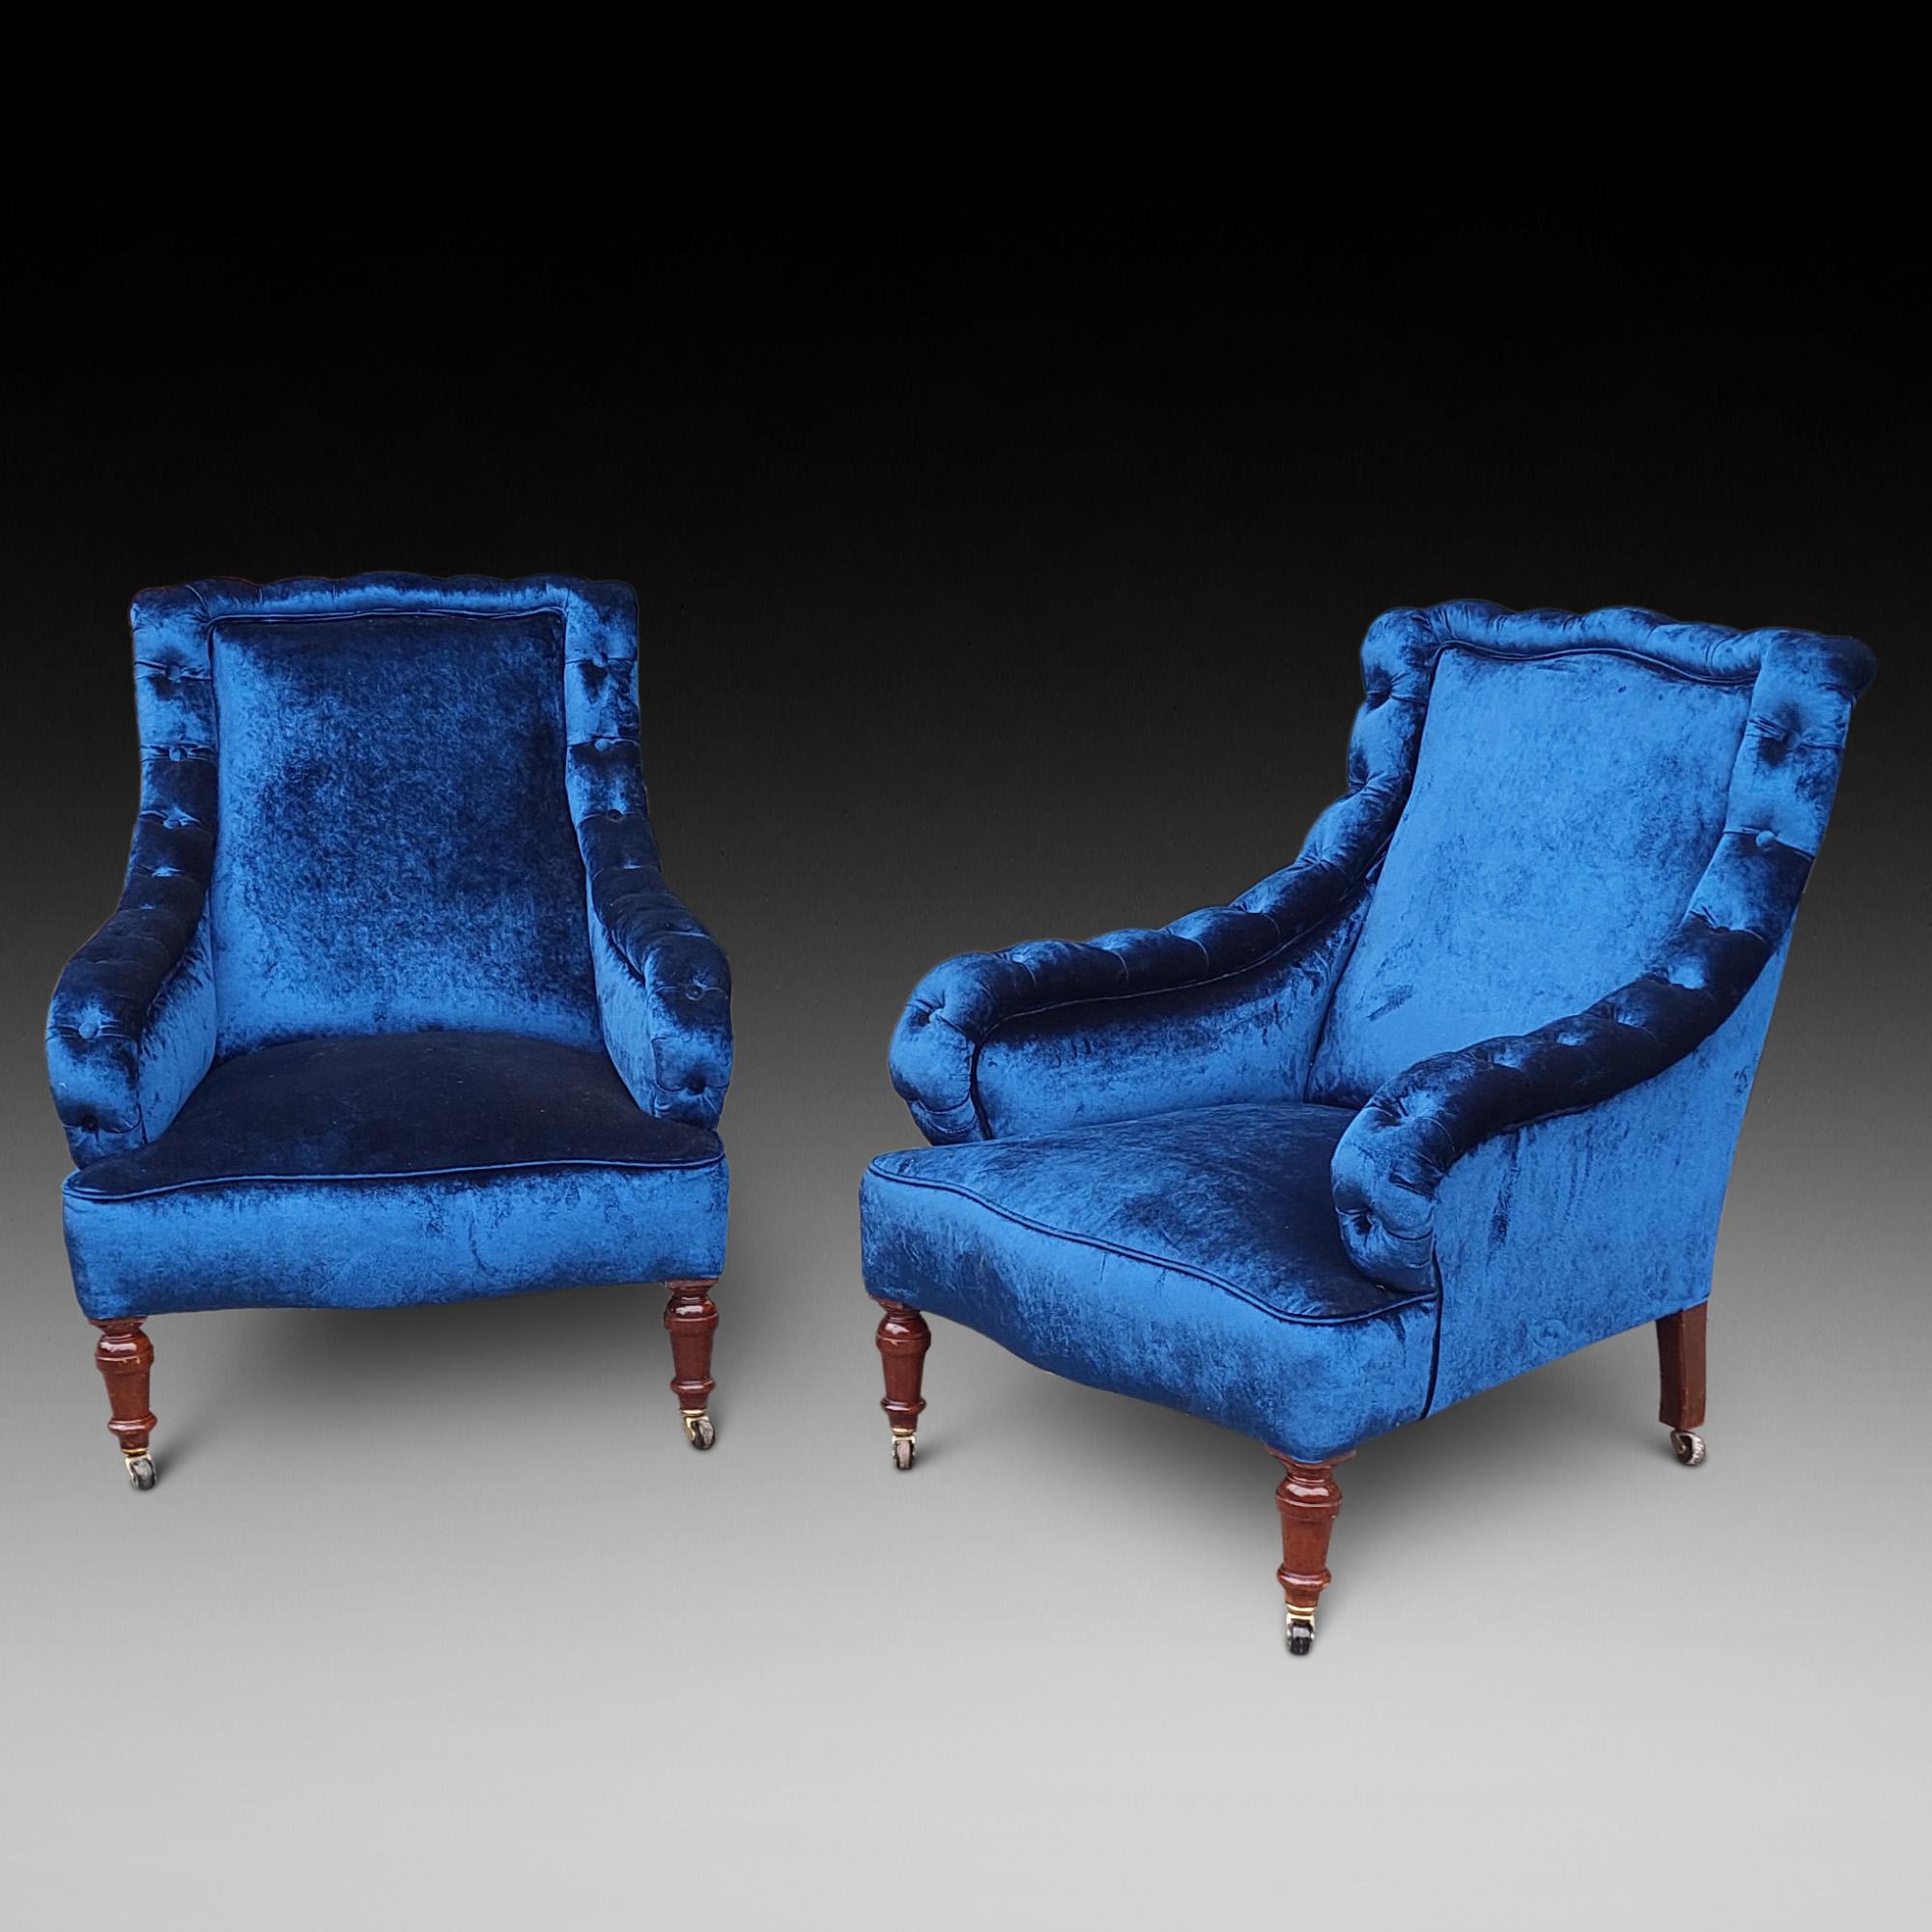 Pair of Victorian Mahogany Framed Armchairs Upholstered in Deep Blue Velvet with Buttoned Arms on Turned Front Legs and Sabre Rear having Pot Castors 29